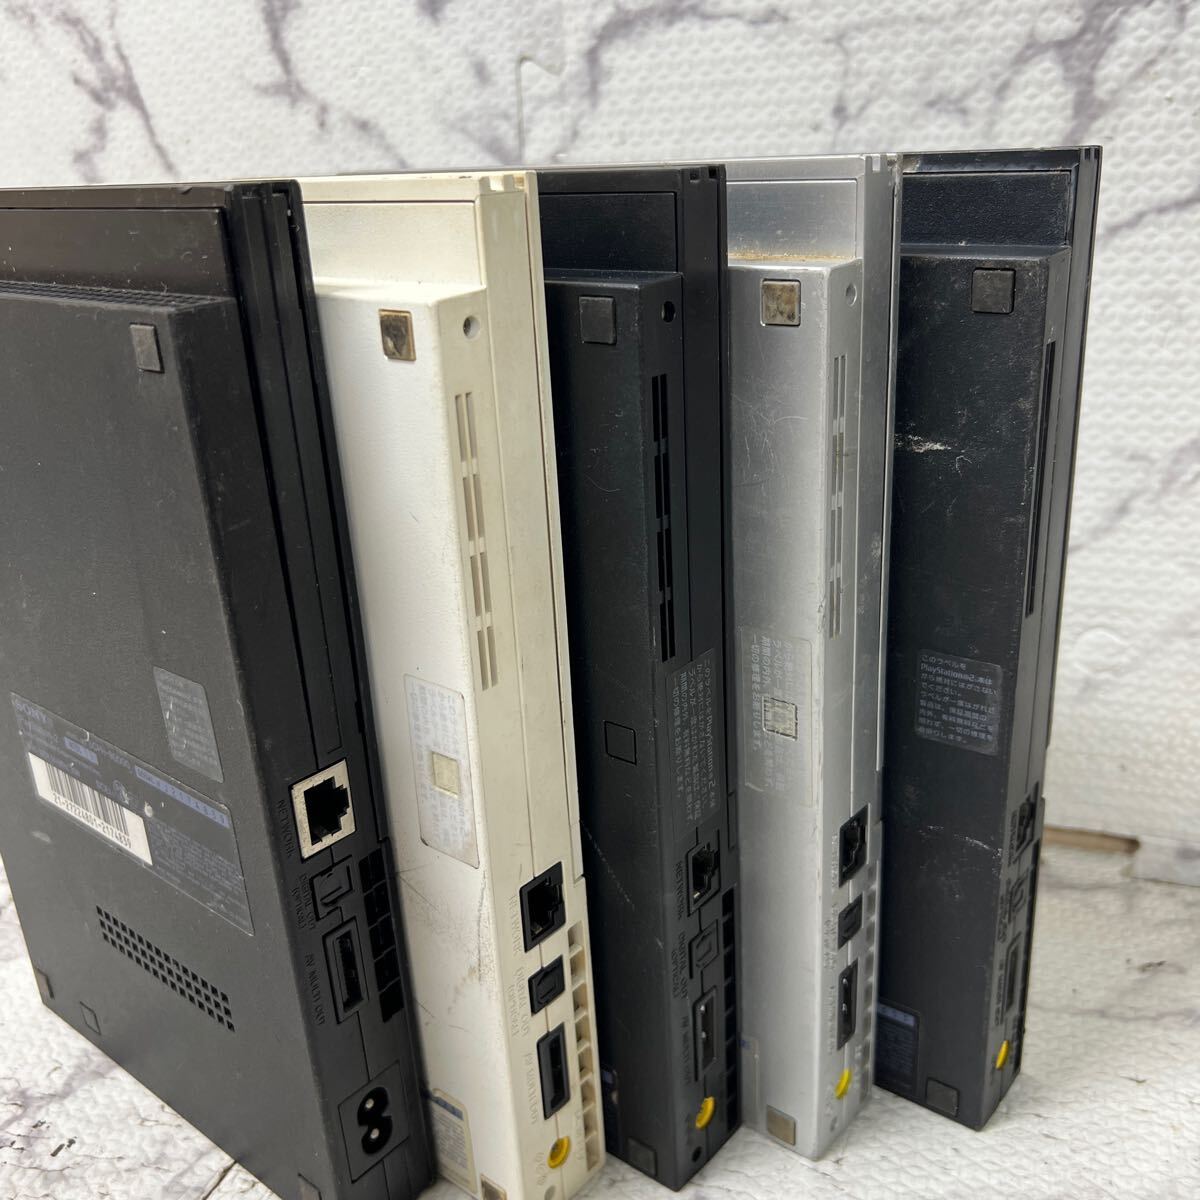 MYG-1524 激安 ゲー厶機 本体 SONY PlayStation 2 PS2 SCPH-70000 SCPH-75000 SCPH-77000 SCPH-90000 5点 4台通電OK 1台通電NG ジャンク　_画像10